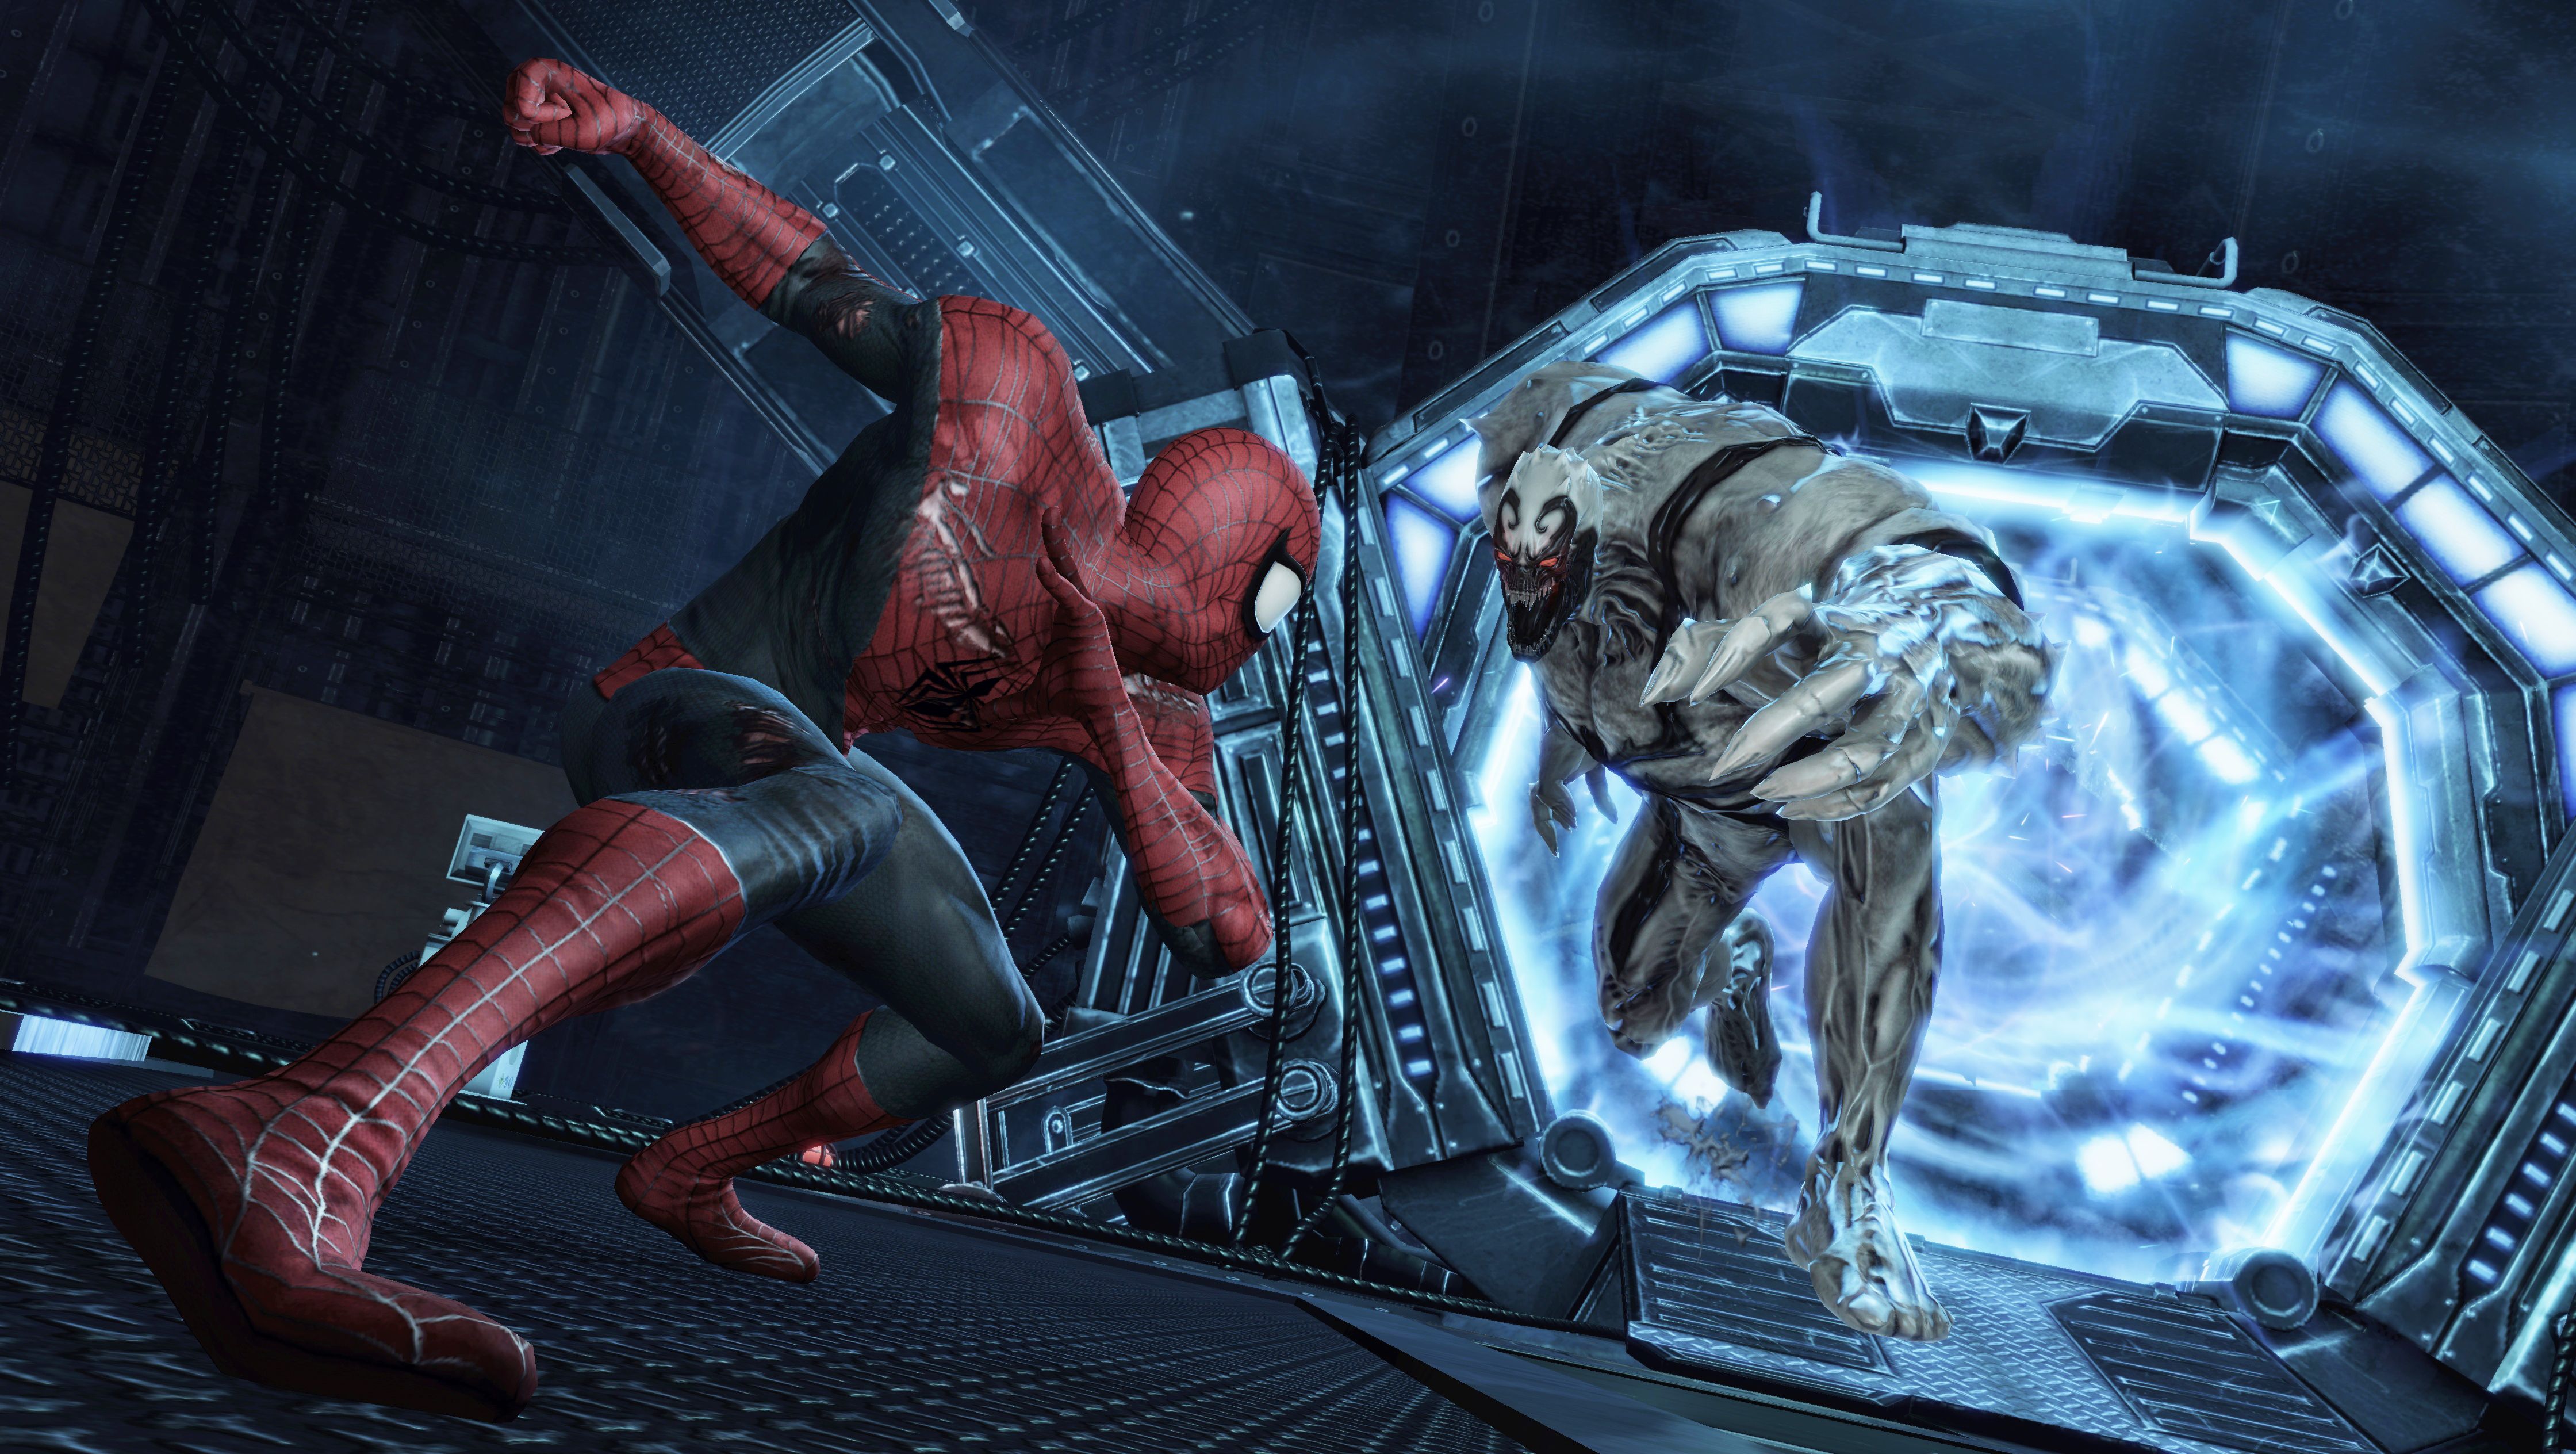 spider man edge of time pc game free download